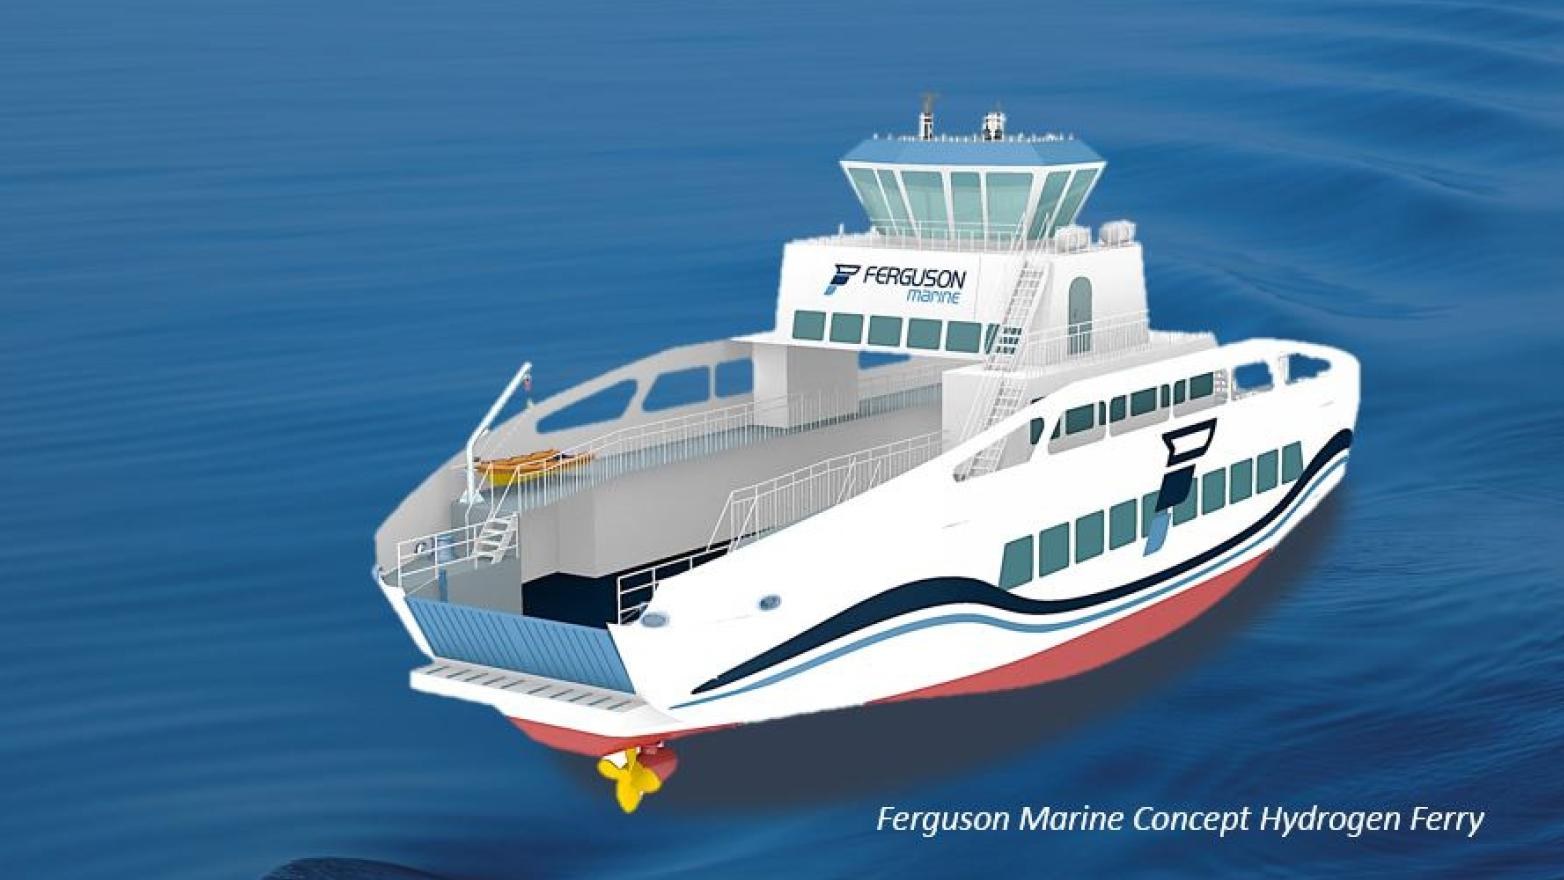 The expected design of the ferry